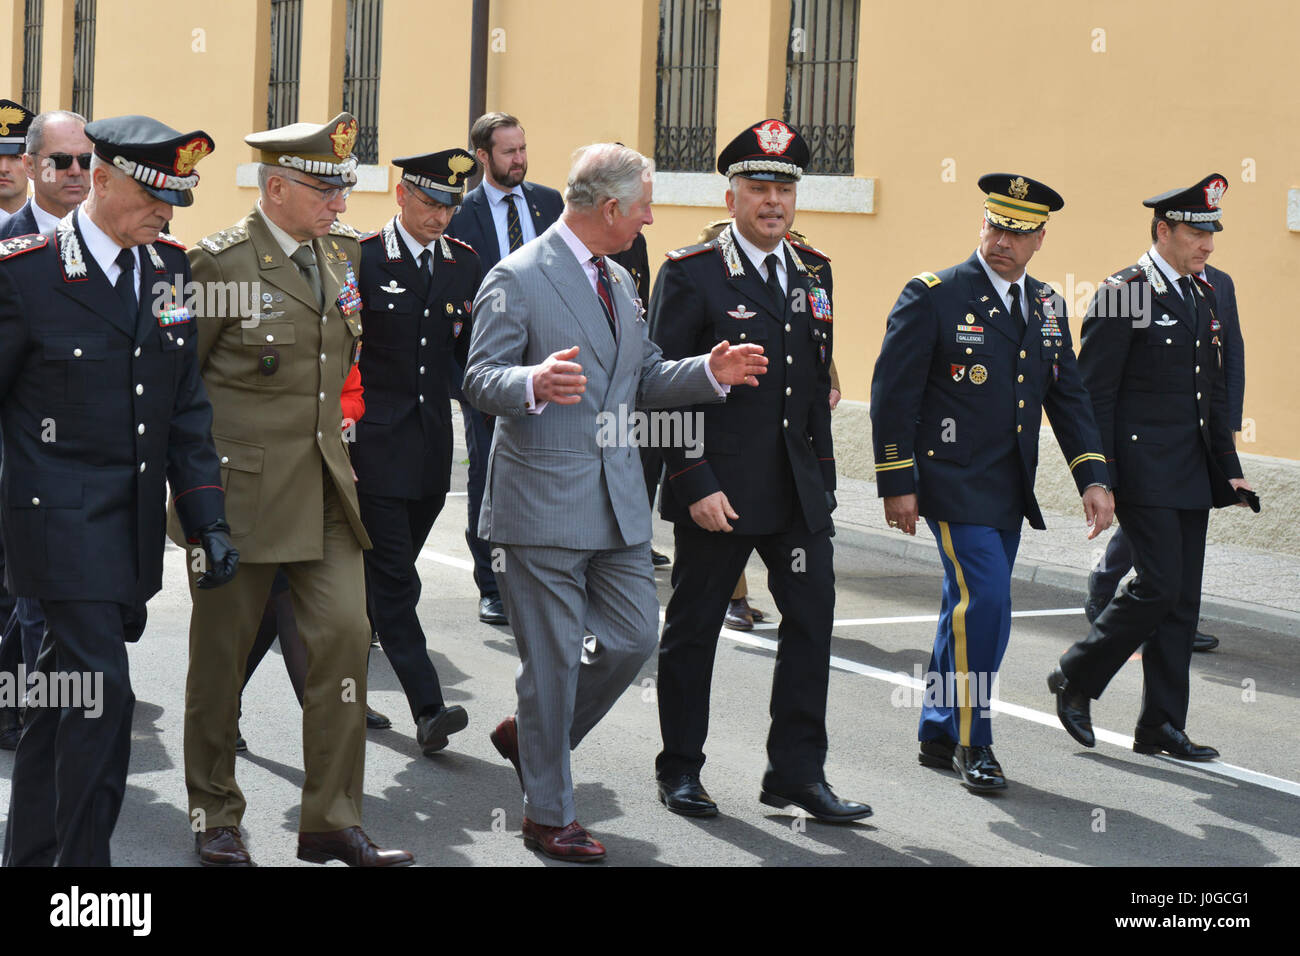 The Royal Highness, Prince Charles, Prince of Wales, during visit at Center of Excellence for Stability Police Units (CoESPU) Vicenza, Italy, April 1, 2017. (U.S. Army Photo by Visual Information Specialist Antonio Bedin/released) Stock Photo